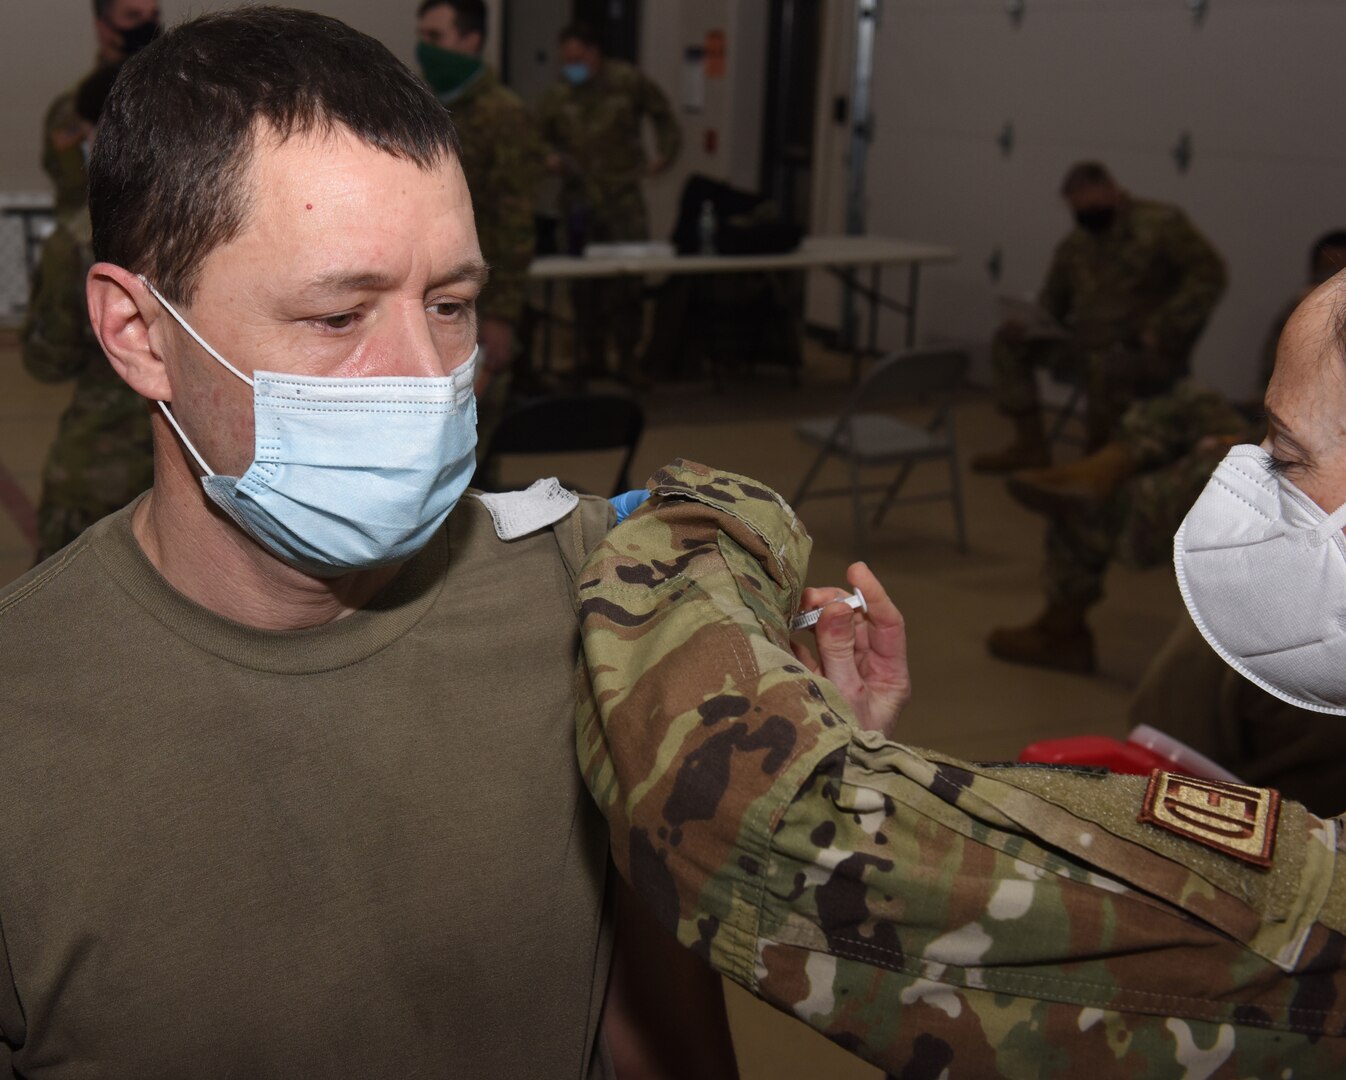 Sgt. Kevin LaPierre receives his second dose of COVID-19 vaccine from Lt. Col. Sarah Davis Feb. 3, 2021, at Camp Johnson, Vermont. Recipients of the second dose commonly experience mild flu-like symptoms including soreness and mild fever. LaPierre is a fueler with the Vermont National Guard's 186th Brigade Support Battalion. Davis is a registered nurse and the officer in charge of immunizations for the Vermont Air National Guard's 158th Medical Group.